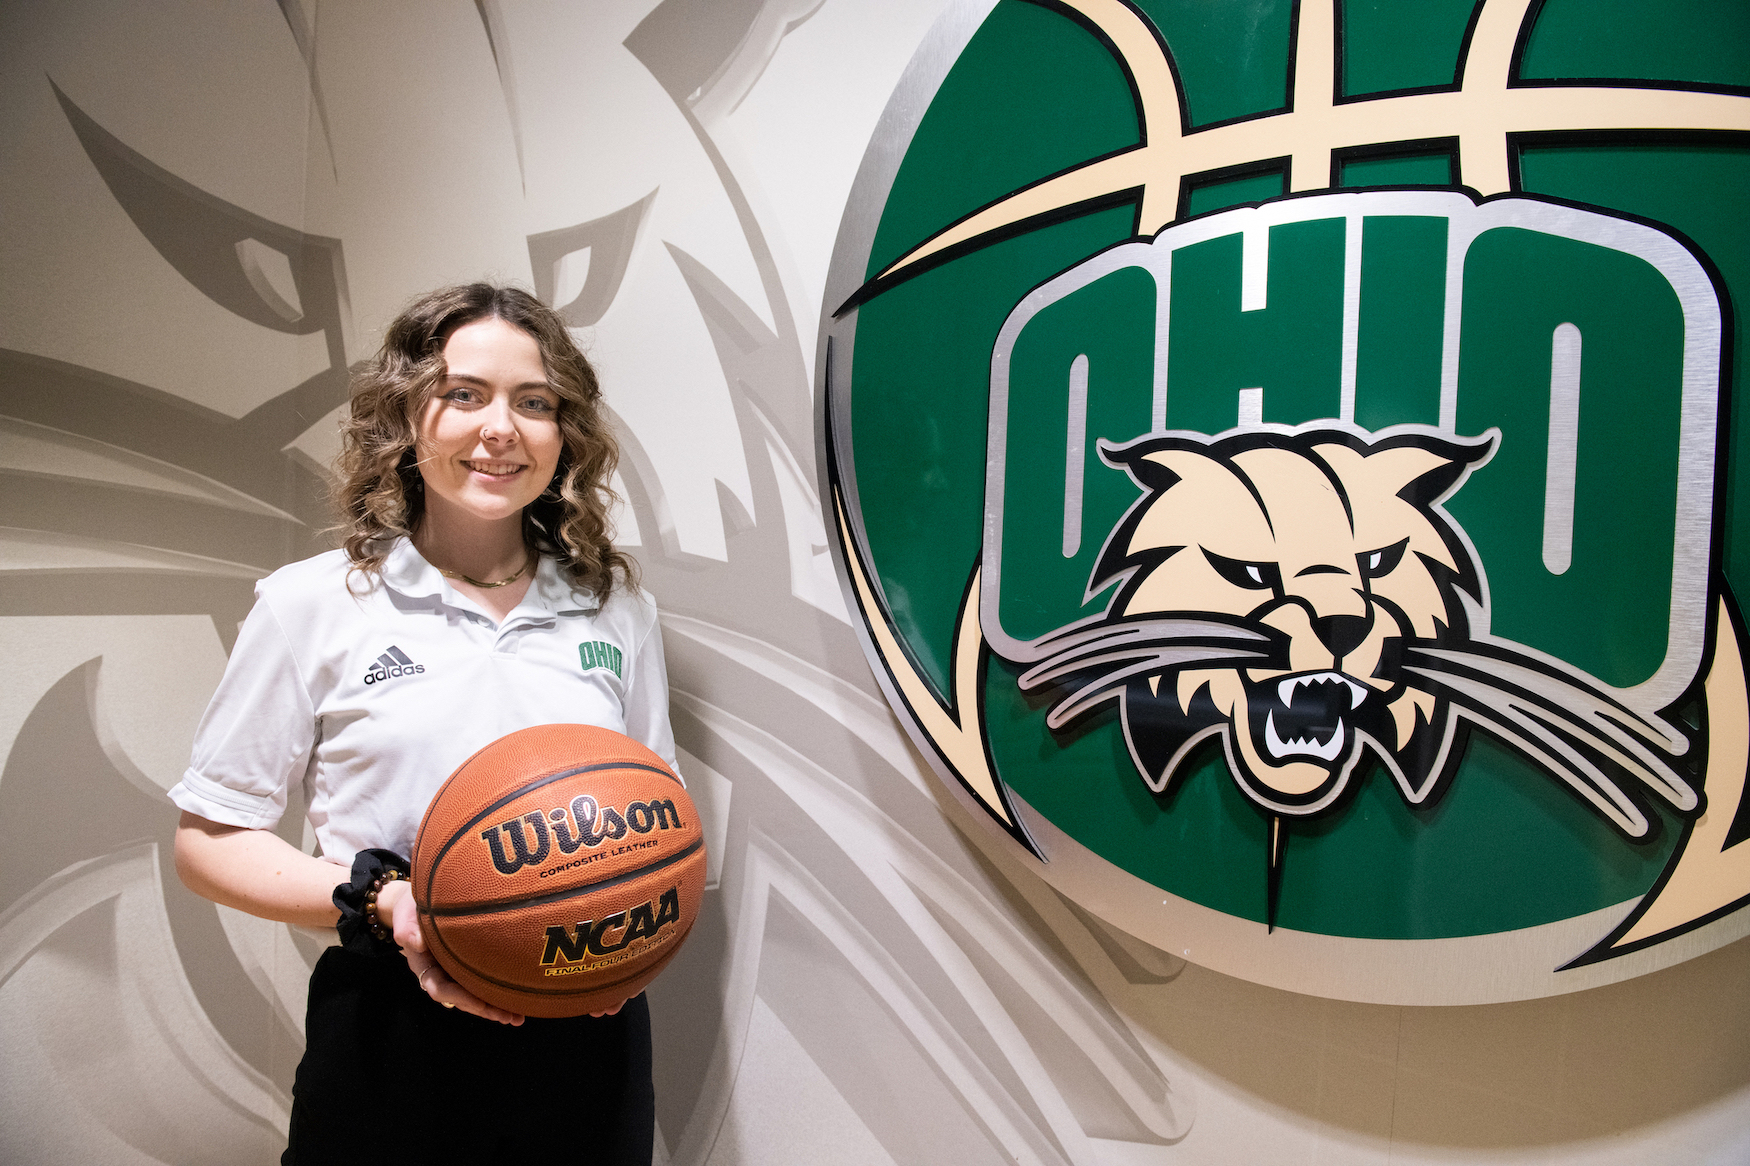 Jess North poses with a basketball in her hands by an Ohio University basketball sign